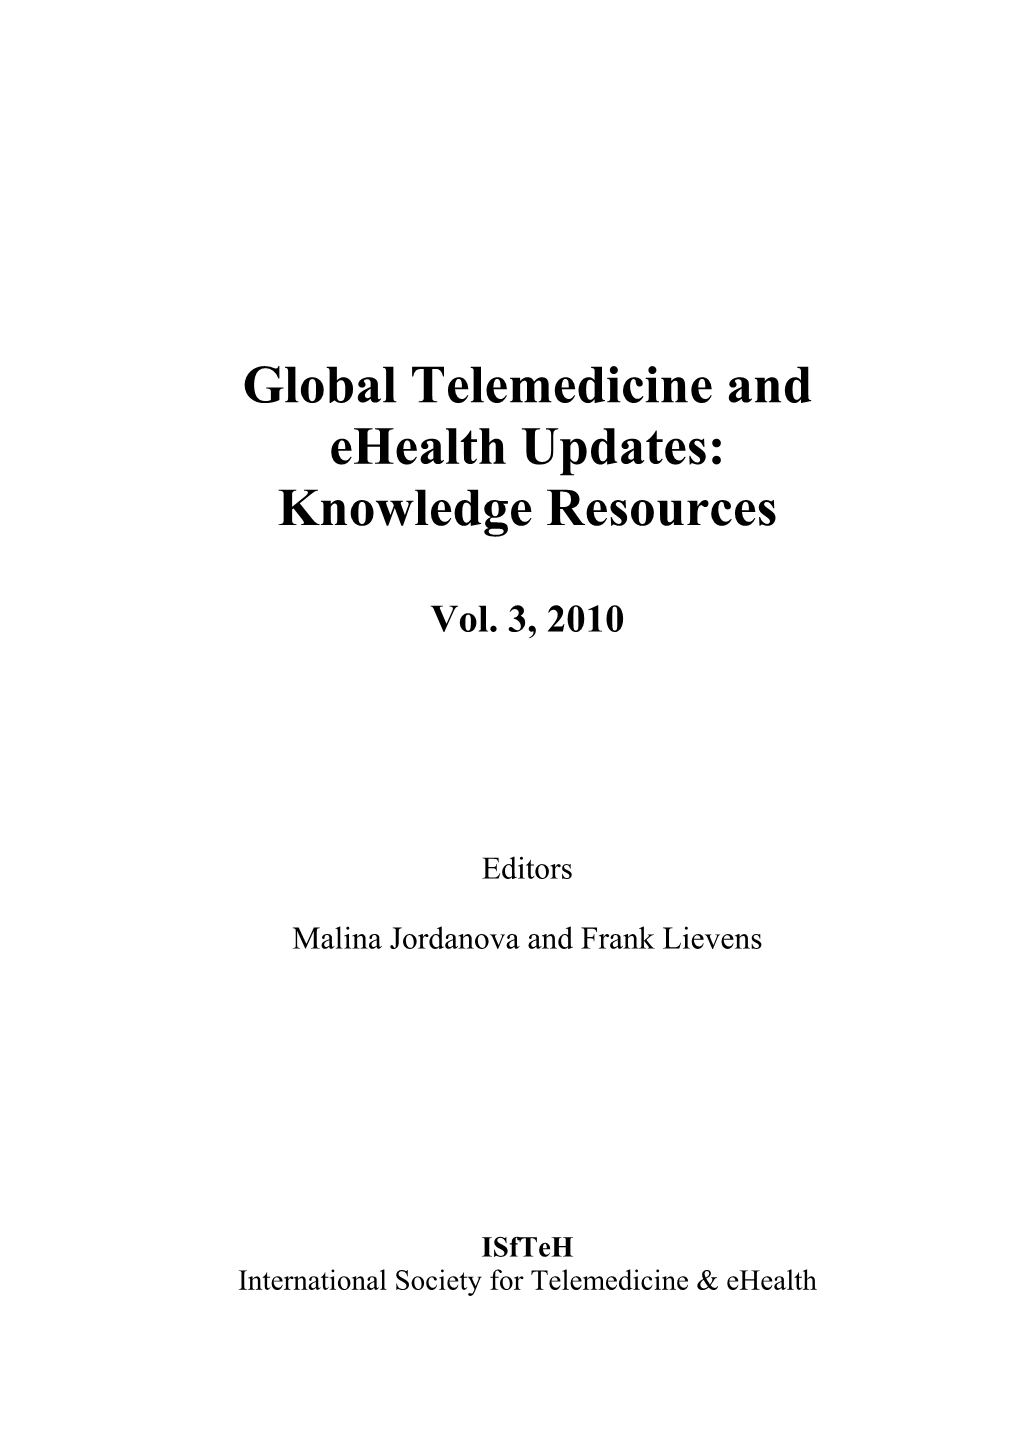 Global Telemedicine and Ehealth Updates: Knowledge Resources